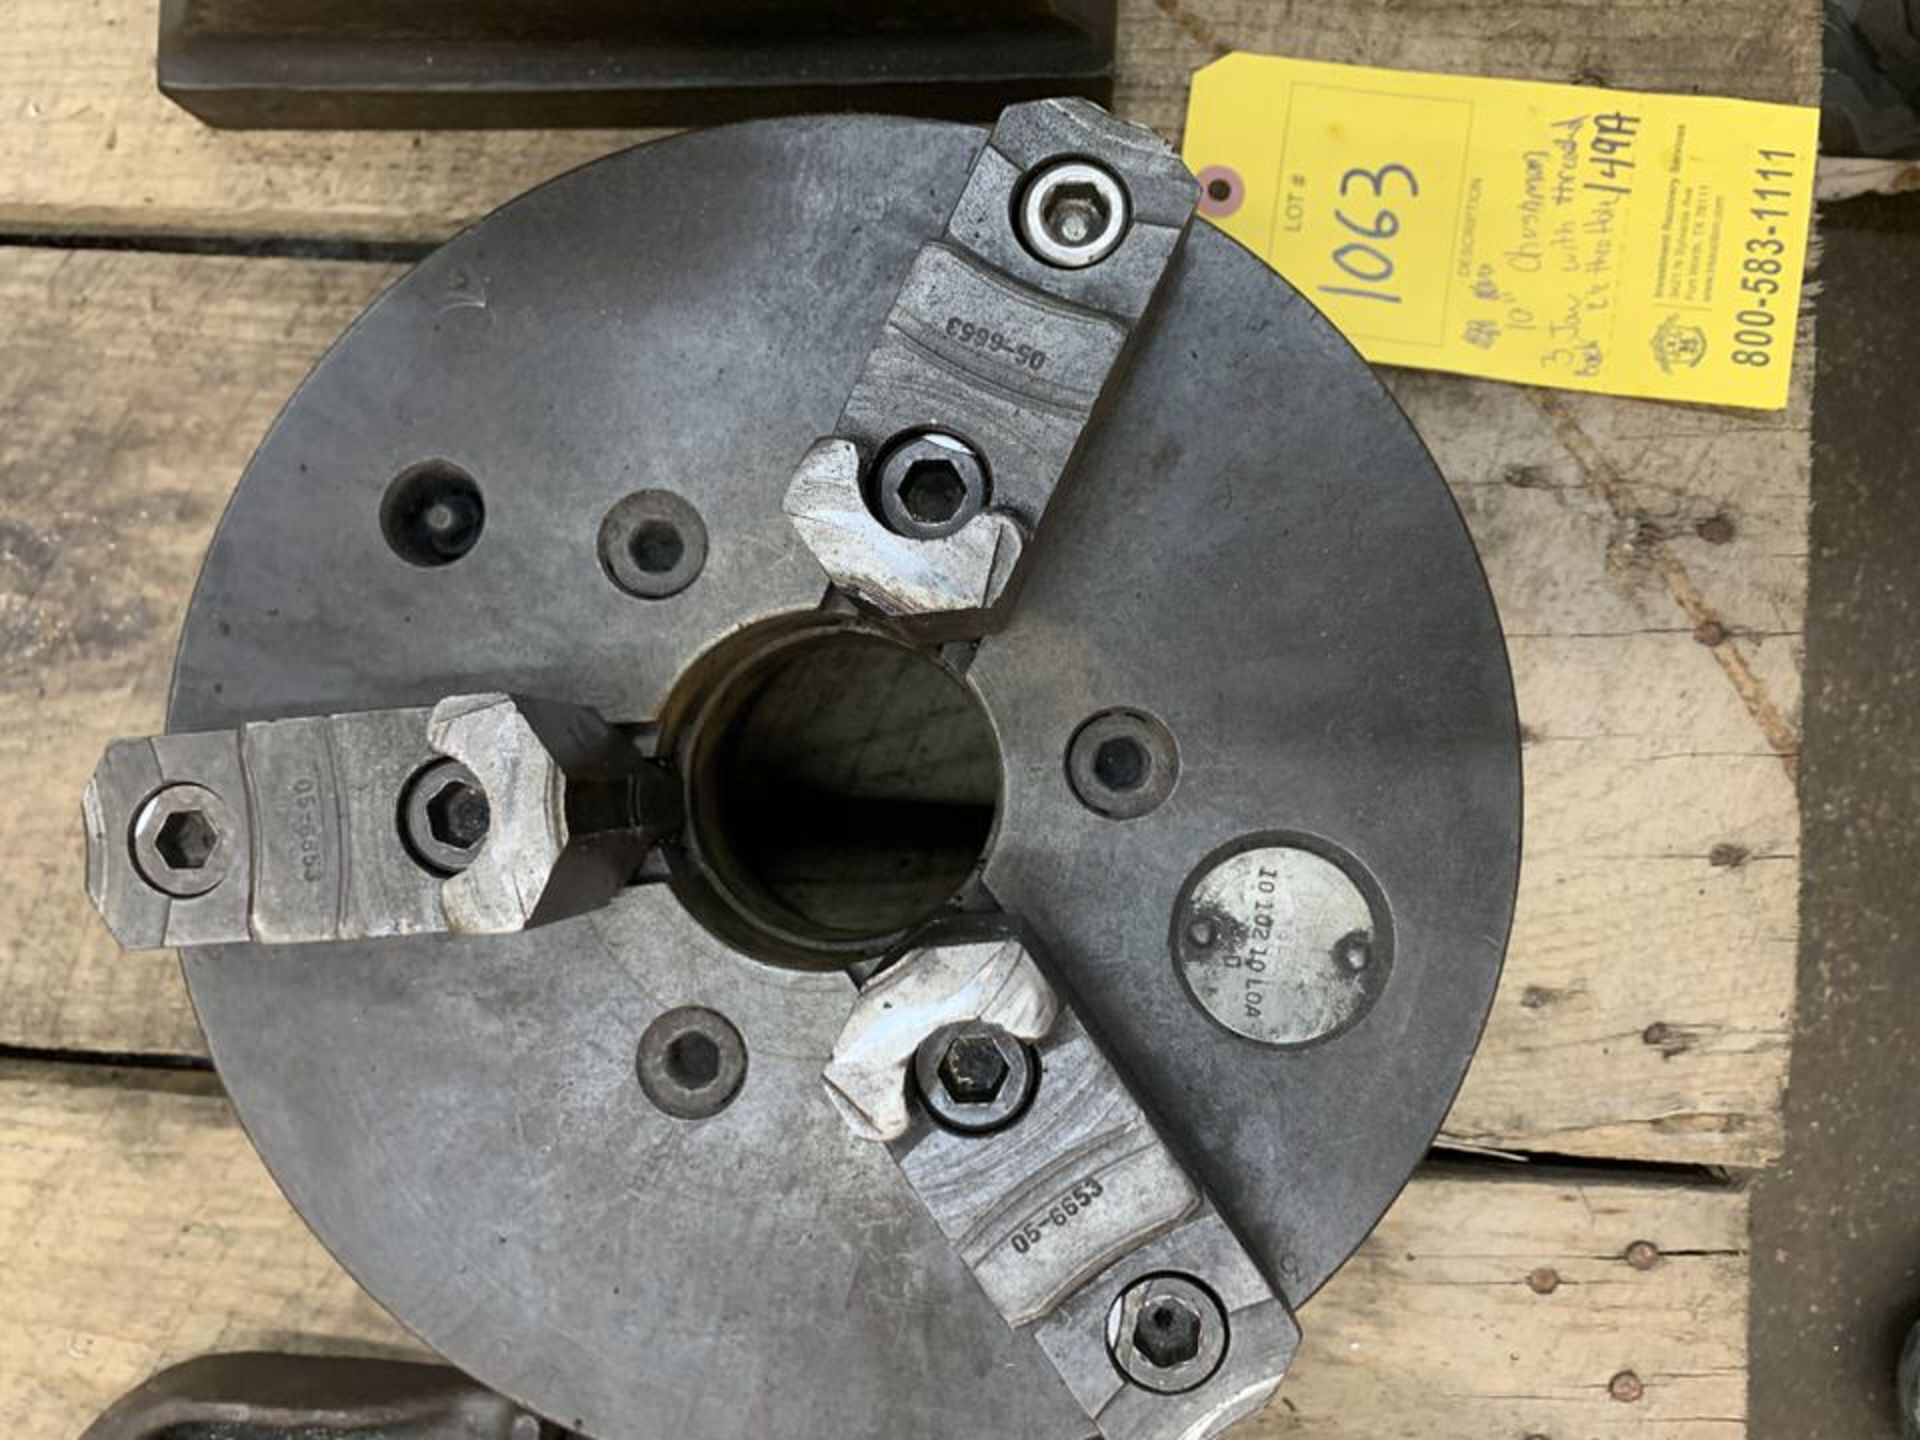 10" Cushman 3-Jaw Chuck with 2.5" Bore - Image 2 of 2